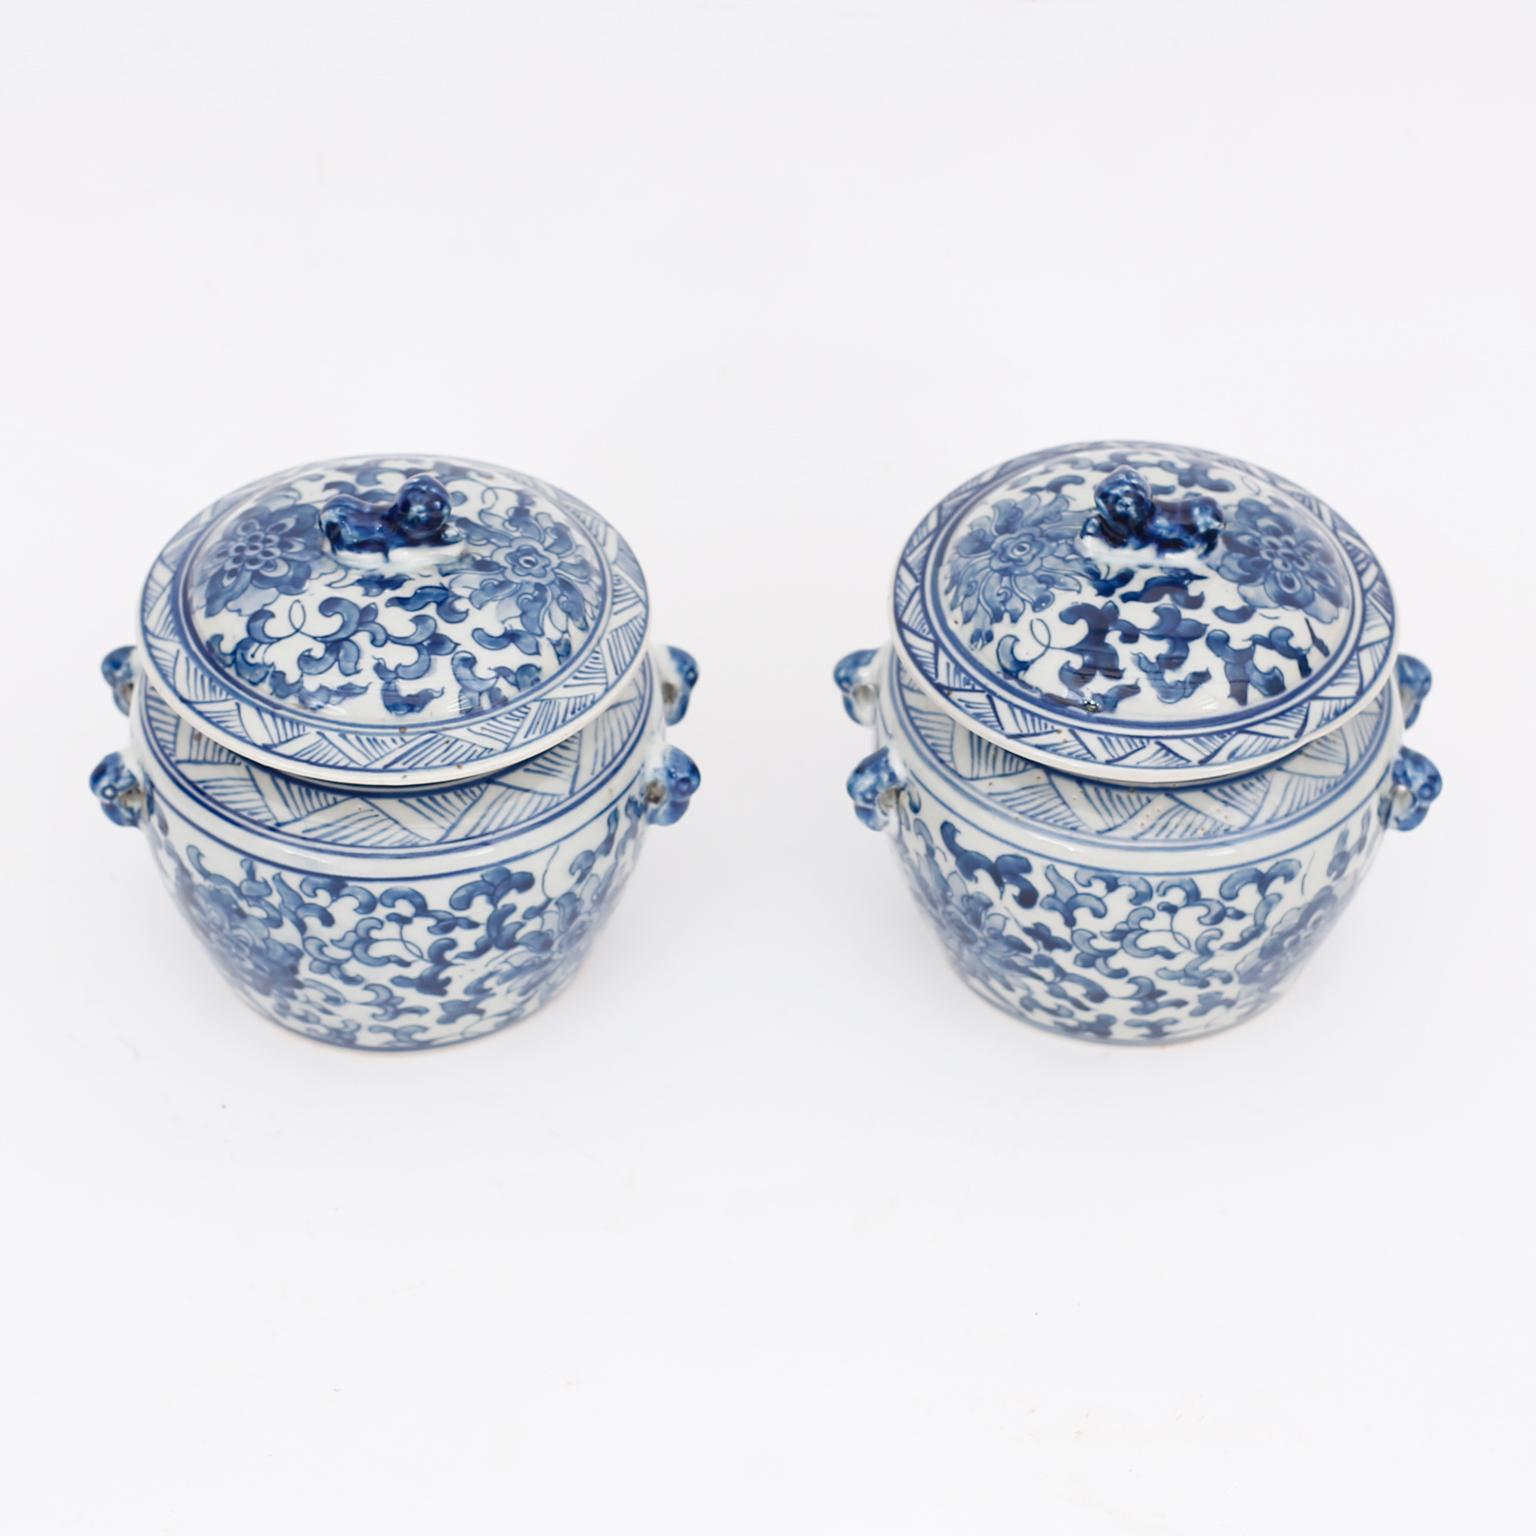 Enchanting pair of Chinese blue and white porcelain lidded pots with dog handles and hand decorated all around with floral designs.